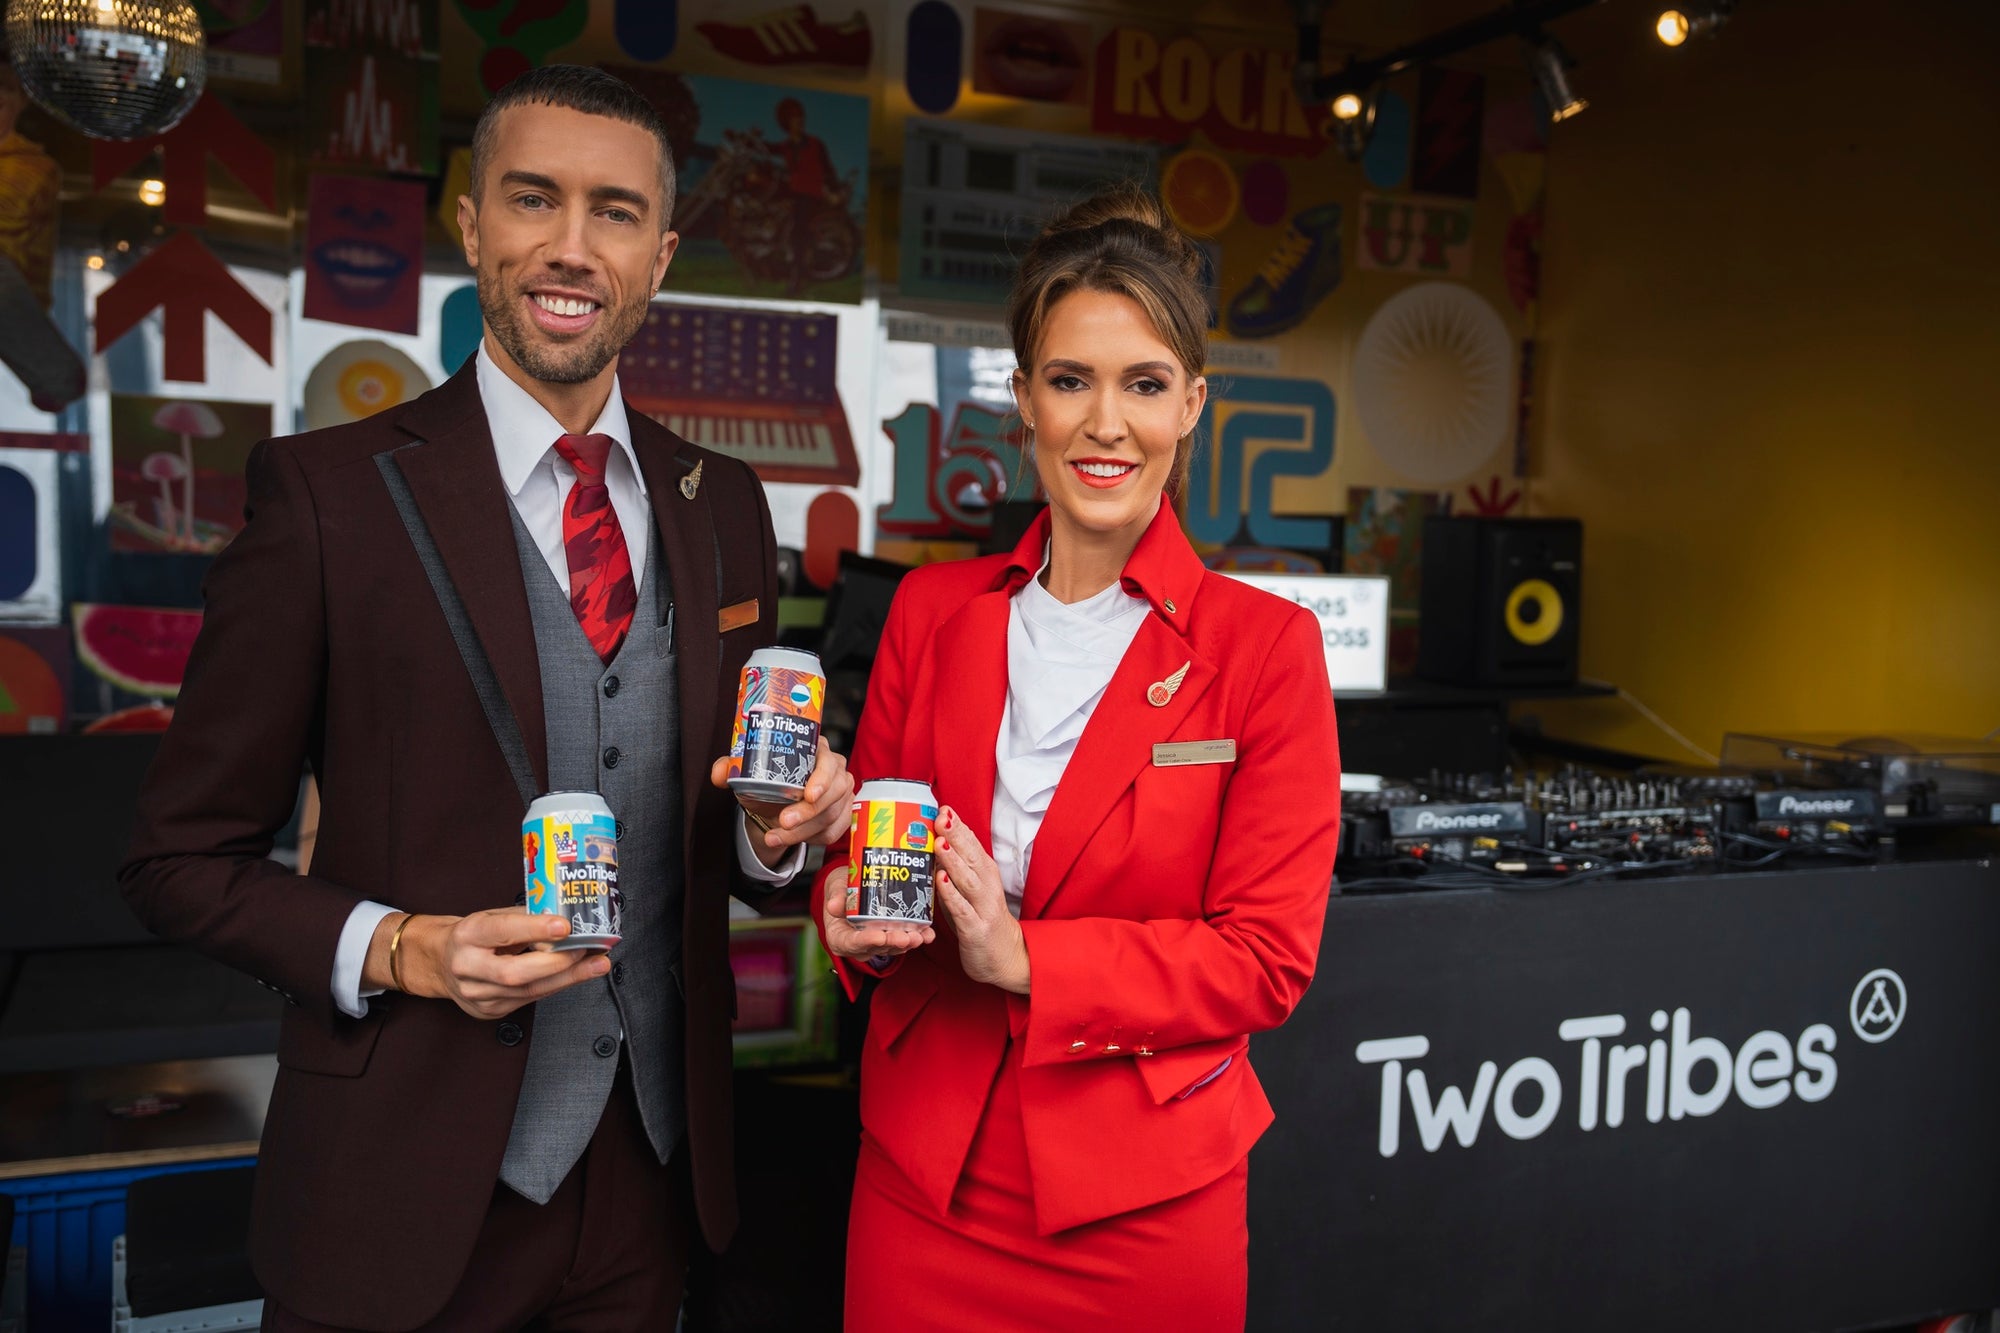 Two Tribes Takes Flight with Virgin Atlantic > New Brand Partnership